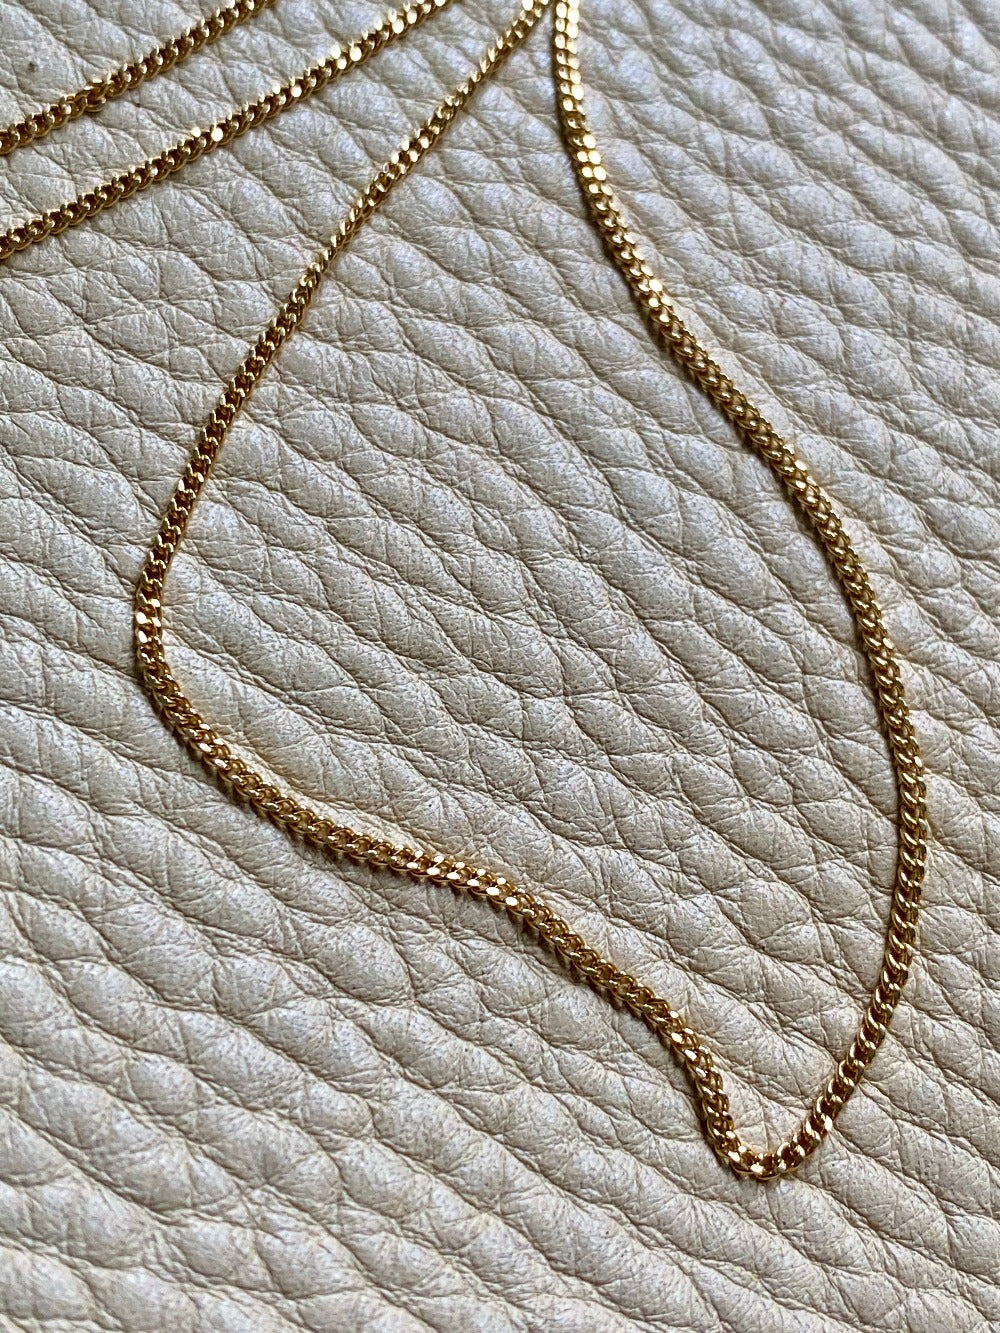 Italian vintage 18k gold curb link necklace by Balestra - 21 inch length